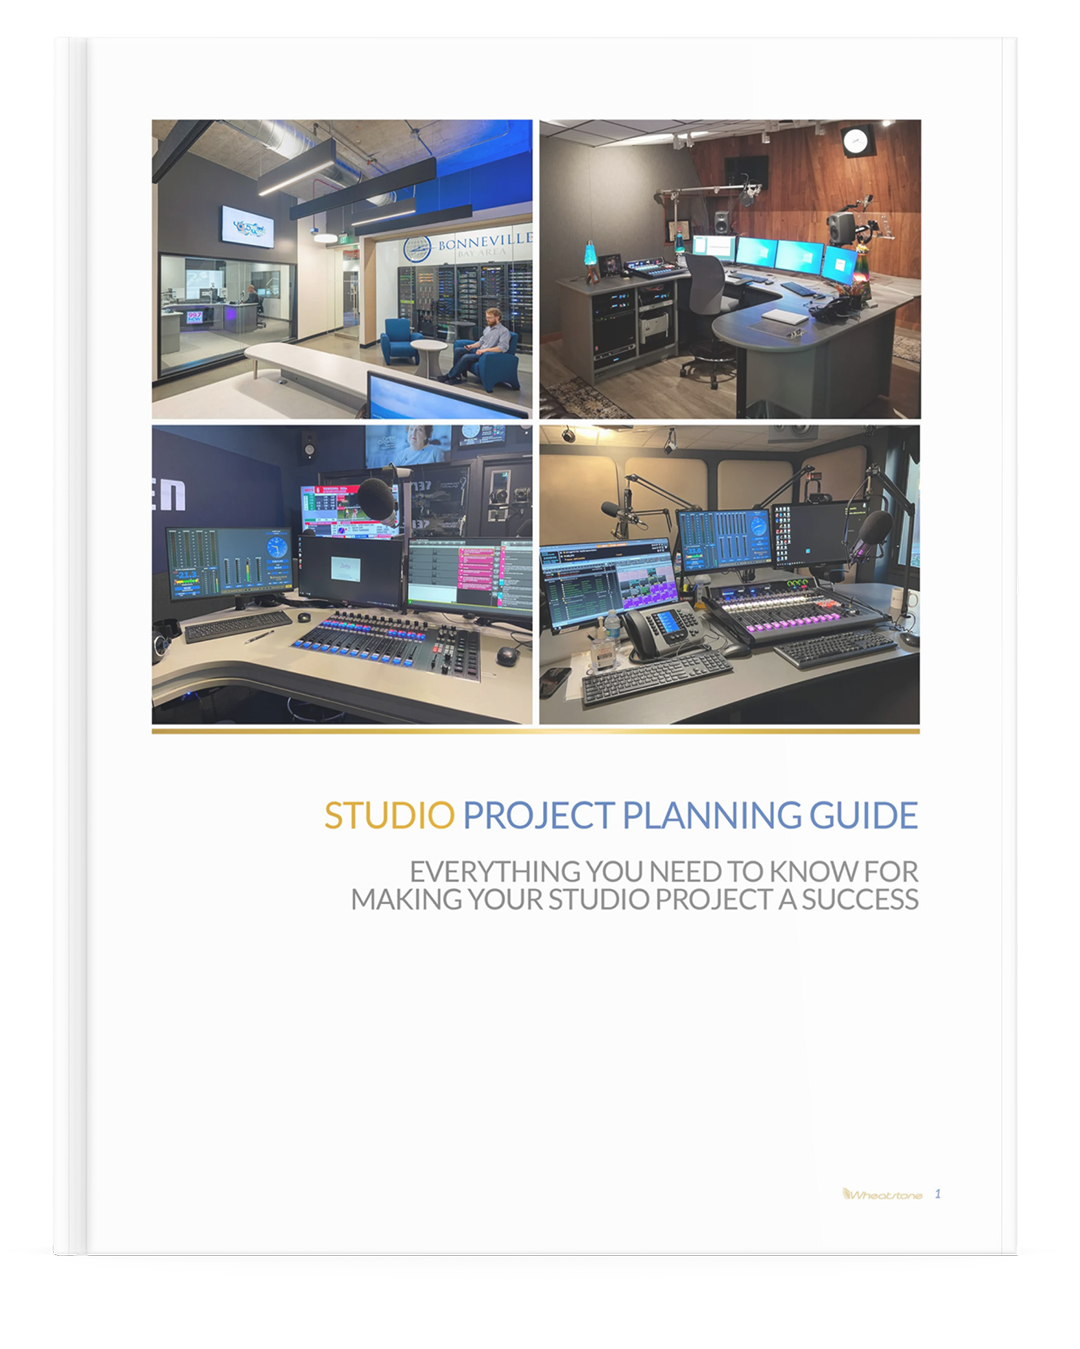 STUDIO PROJECT PLANNING GUIDE